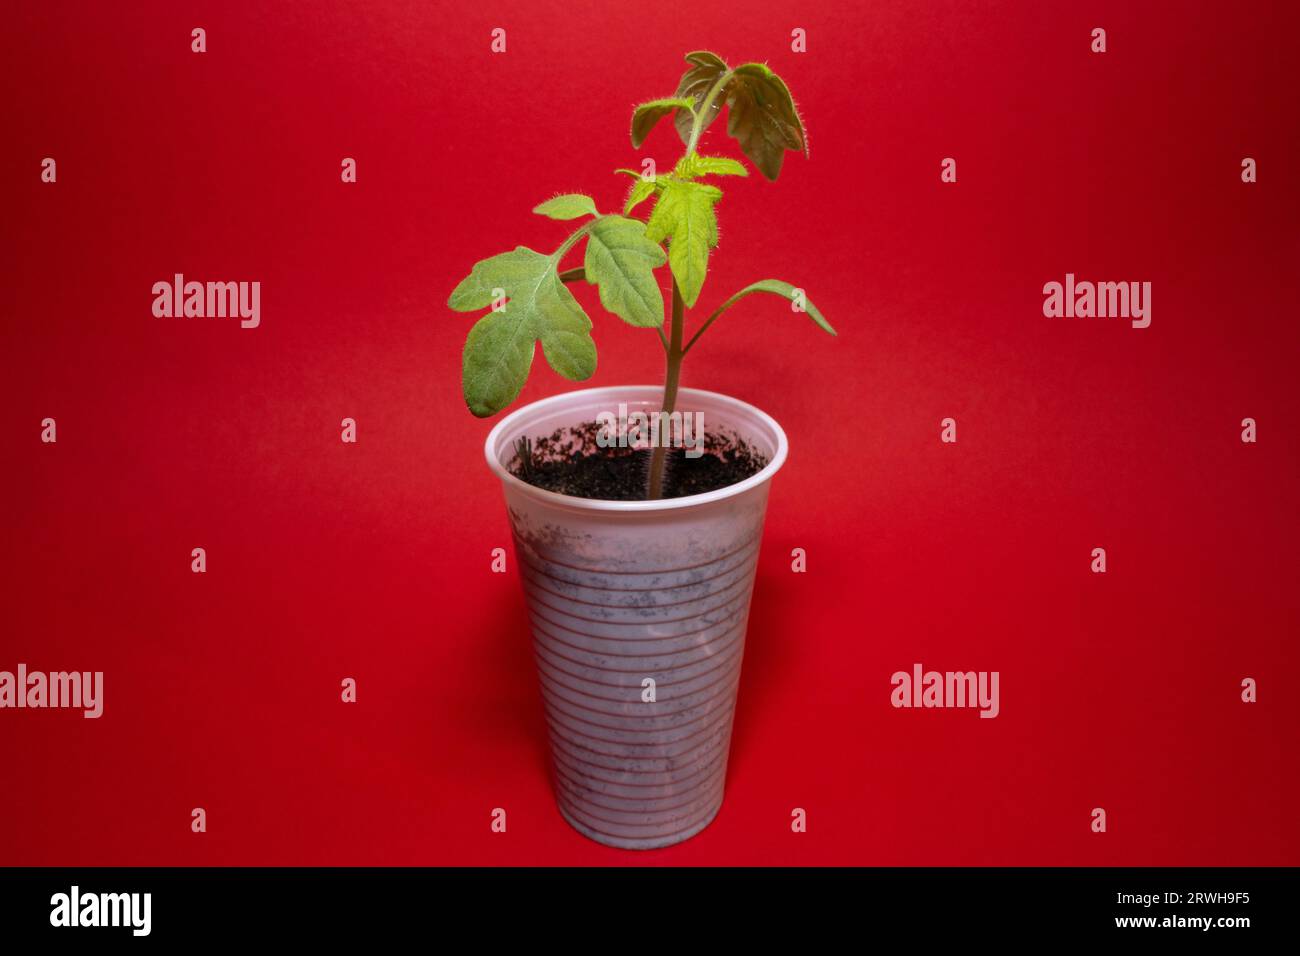 Small tomato plant in a white plastic cup with red background Stock Photo